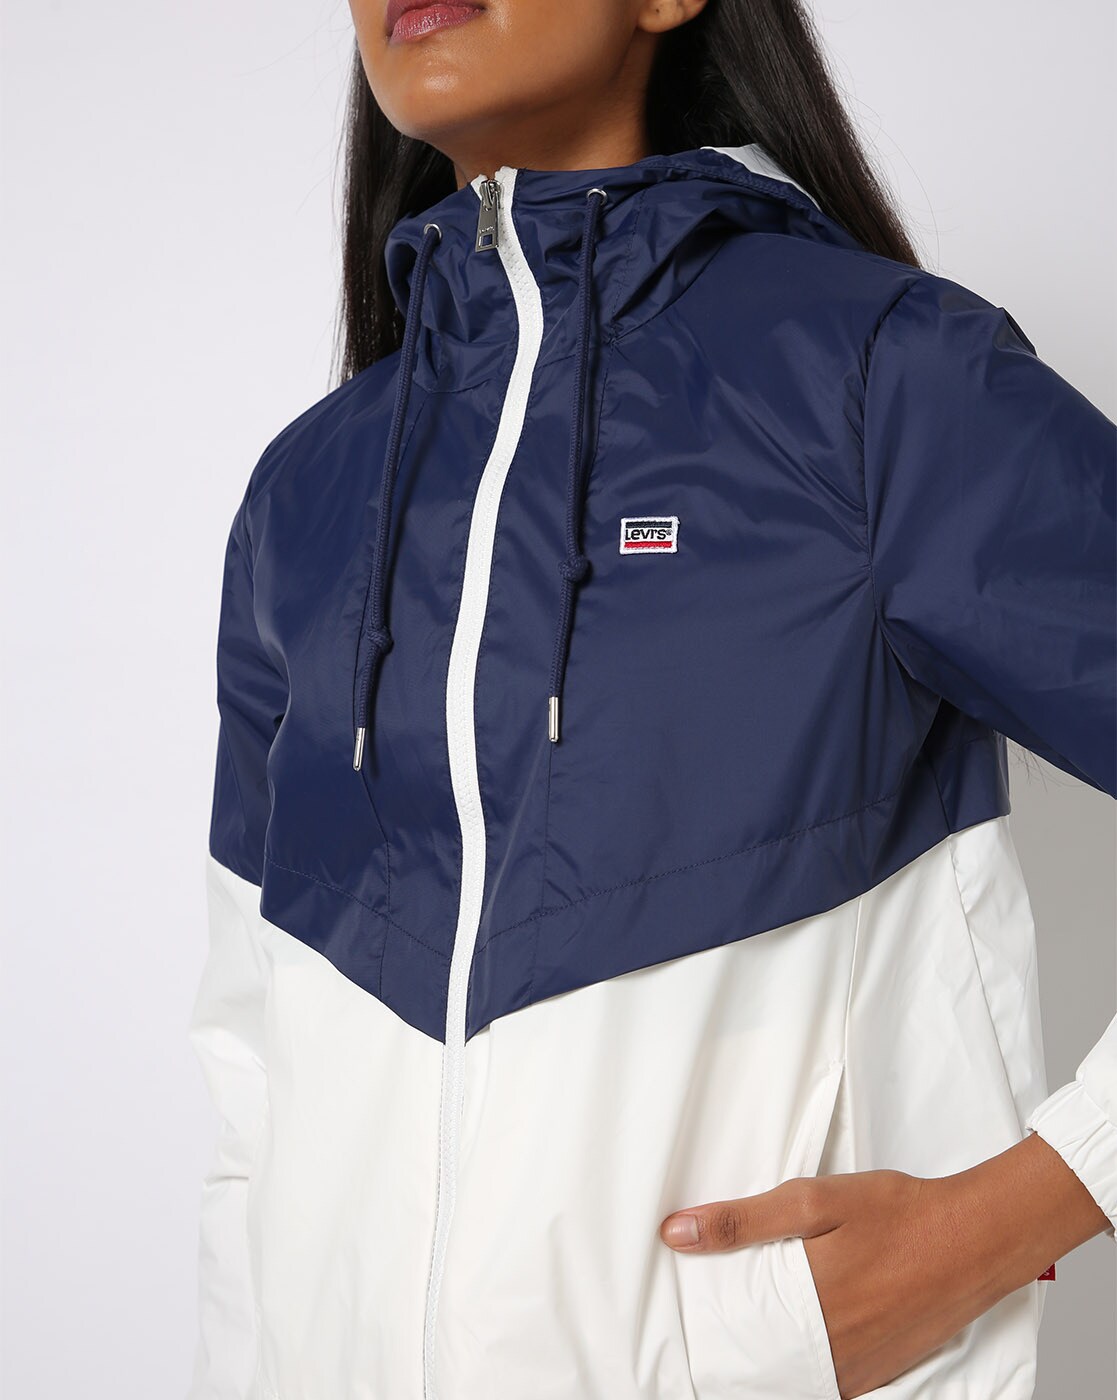 Buy White & Blue Jackets & Coats for Women by LEVIS Online